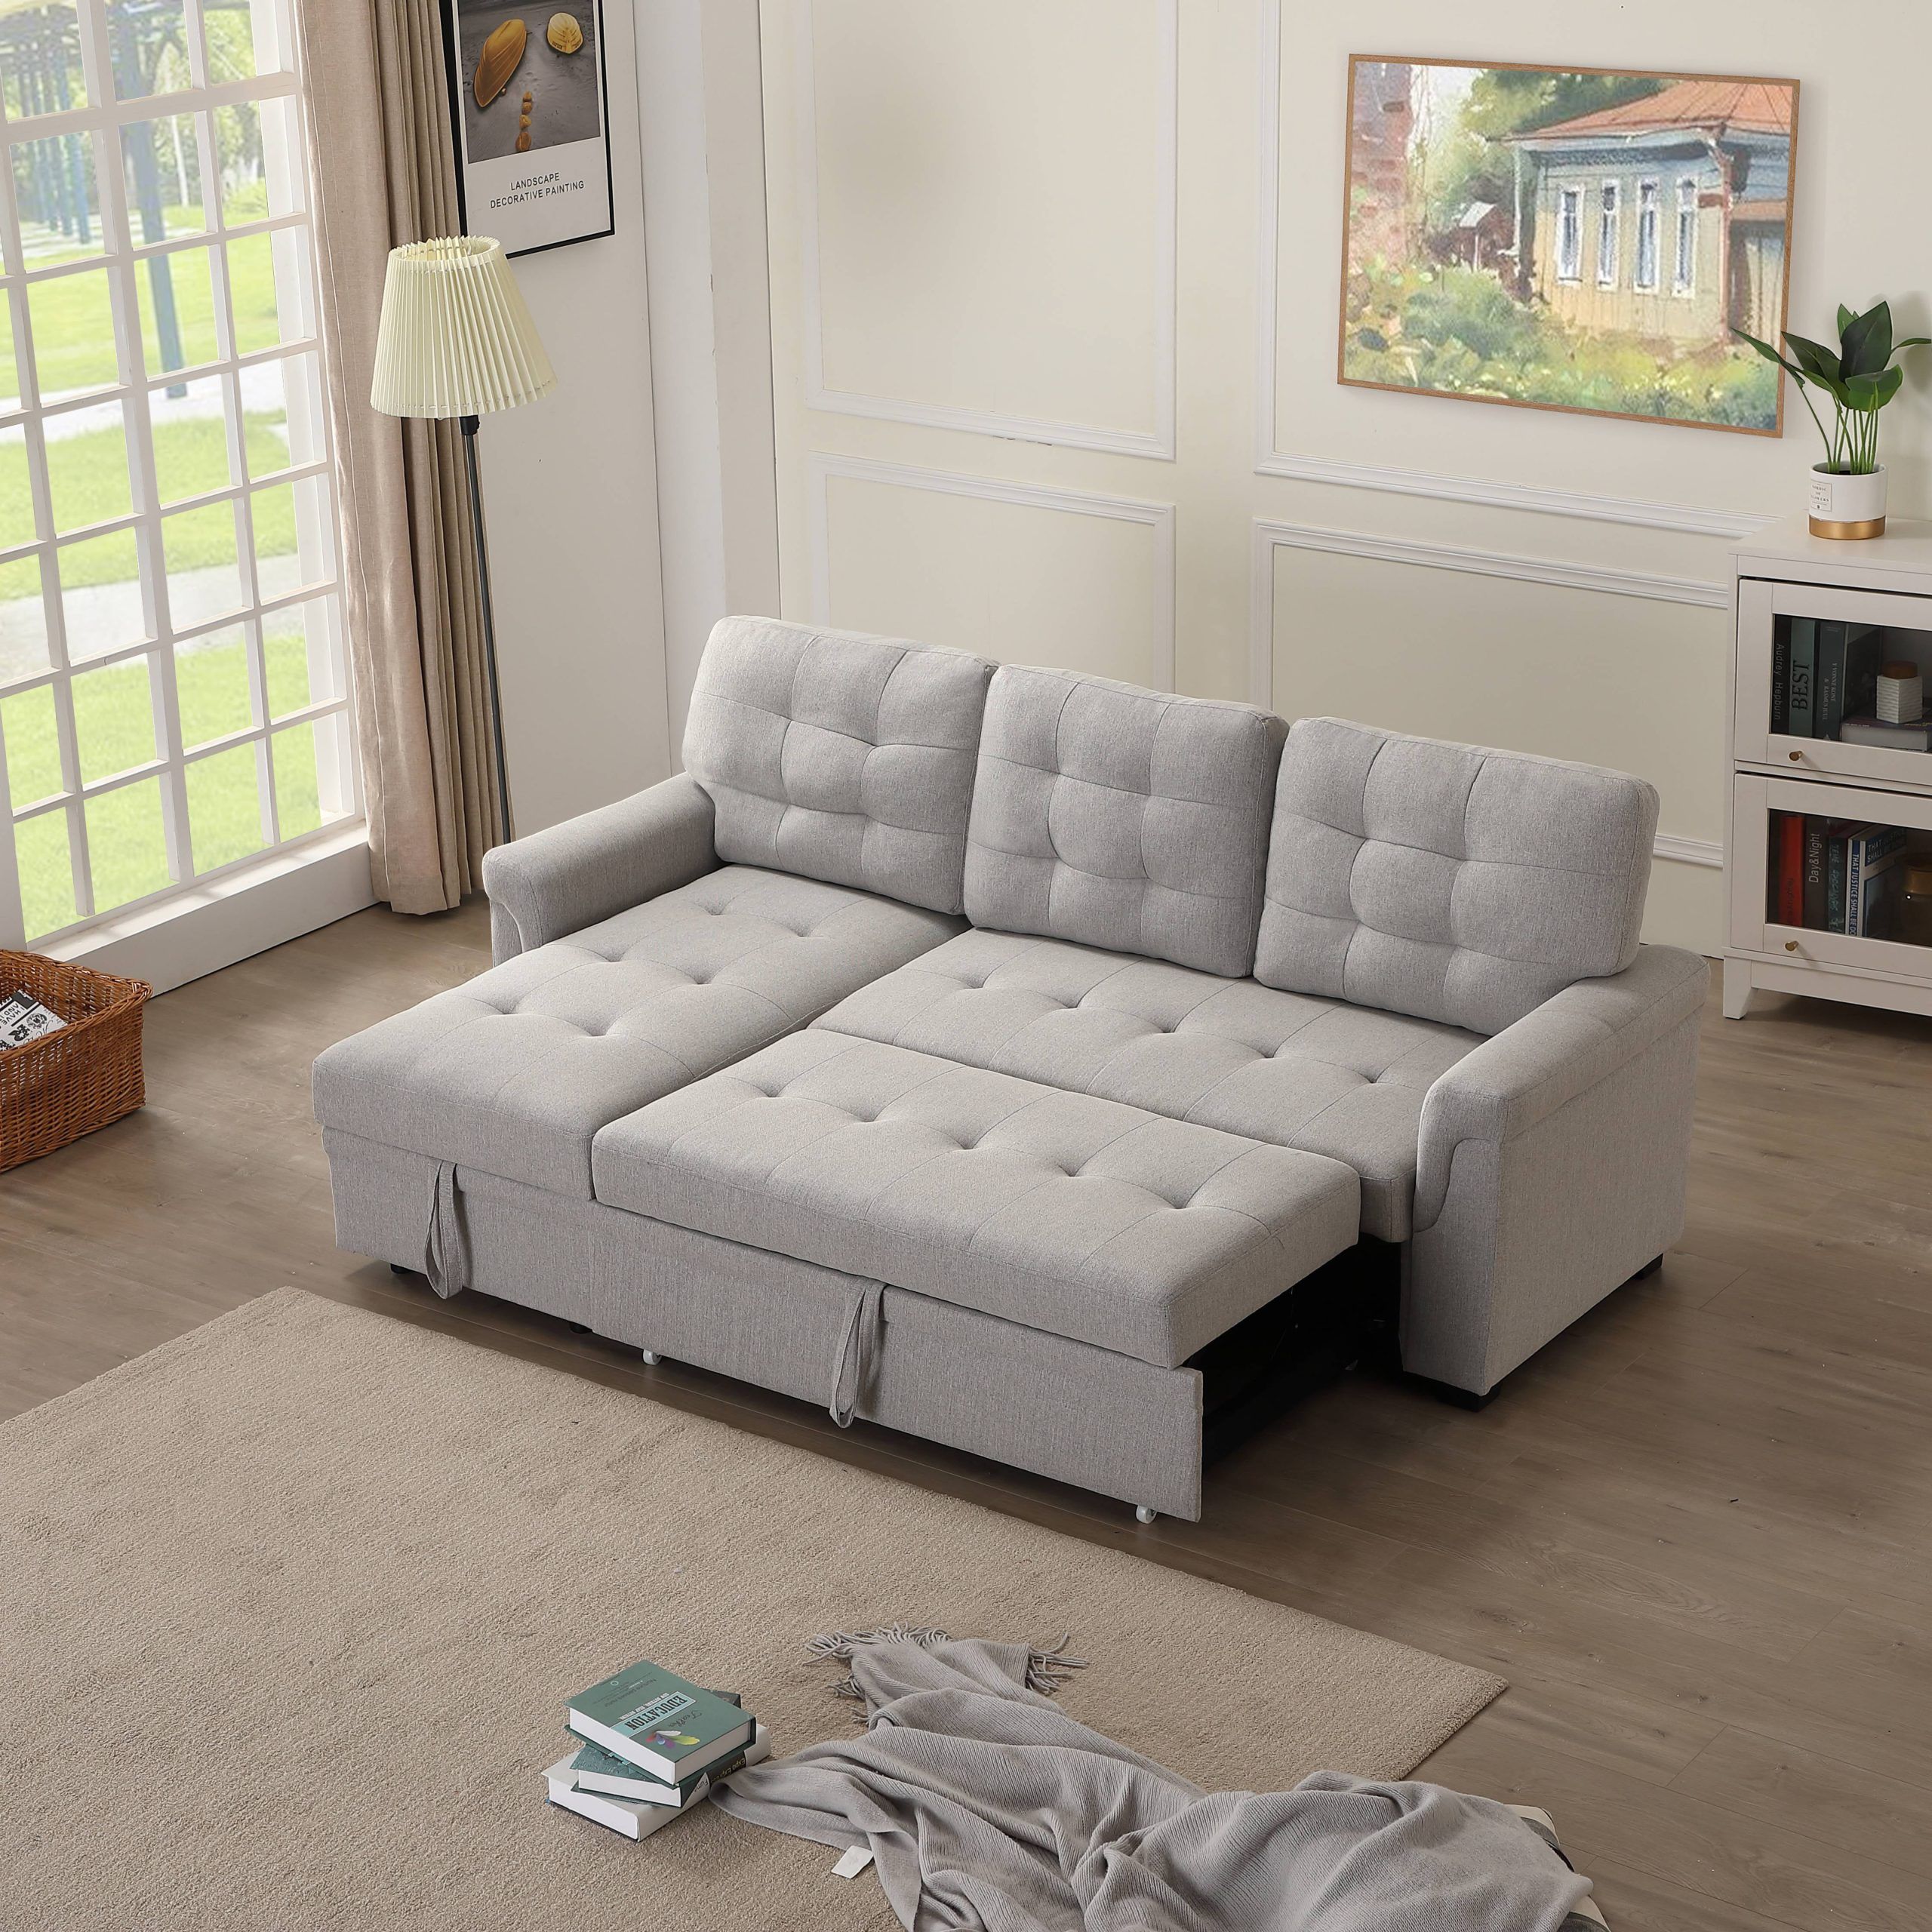 Reversible Sectional Sofas With Regard To Well Known Madison Home Traditional Small Space Velvet Sectional Sofa With (View 6 of 15)